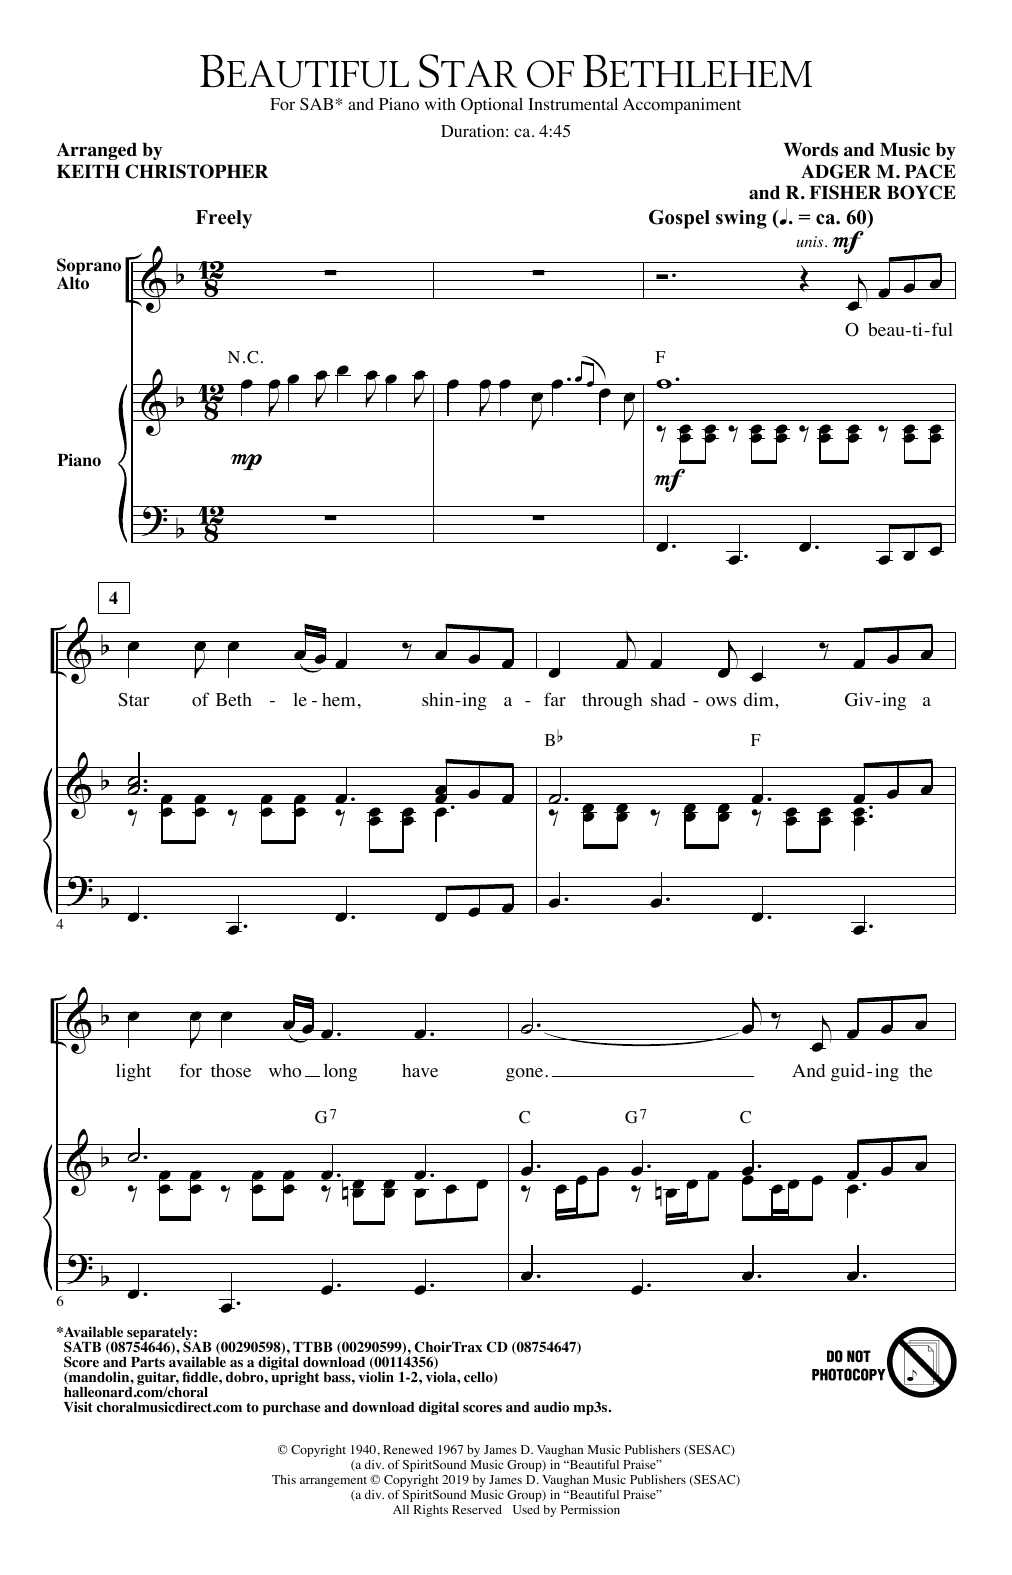 Download Adger M. Pace and R. Fisher Boyce Beautiful Star Of Bethlehem (arr. Keith Sheet Music